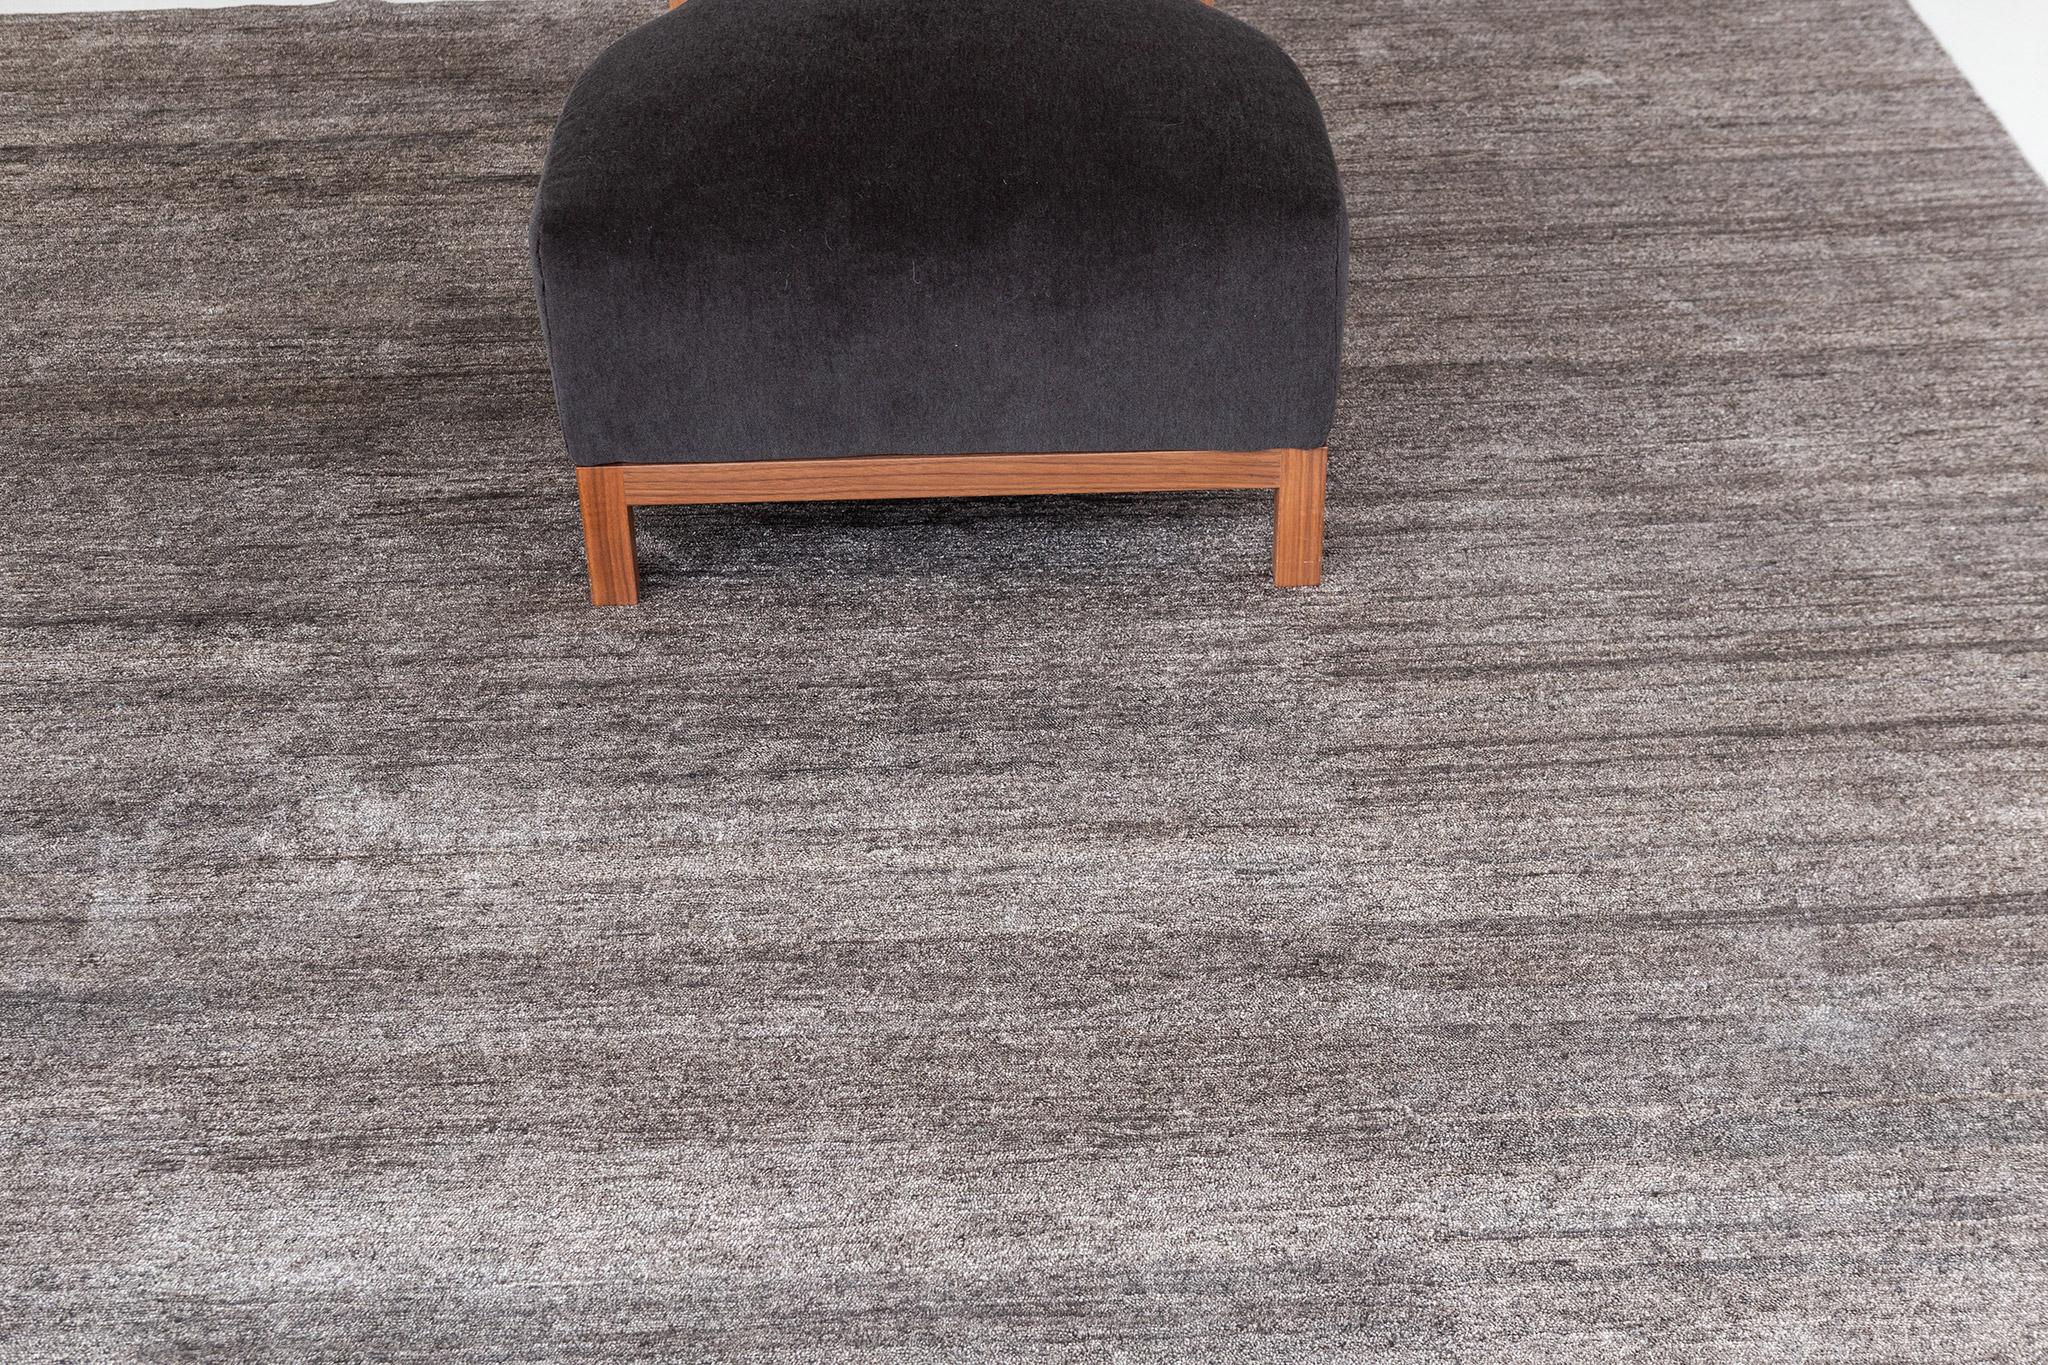 Dara' is a solid bamboo silk rug in stunning charcoal tones. Its simplicity does not take away from the rug's luxurious quality and beautiful sheen. Dara is a splendid rug for any design space.

Rug Number
25939
Size
8' 2